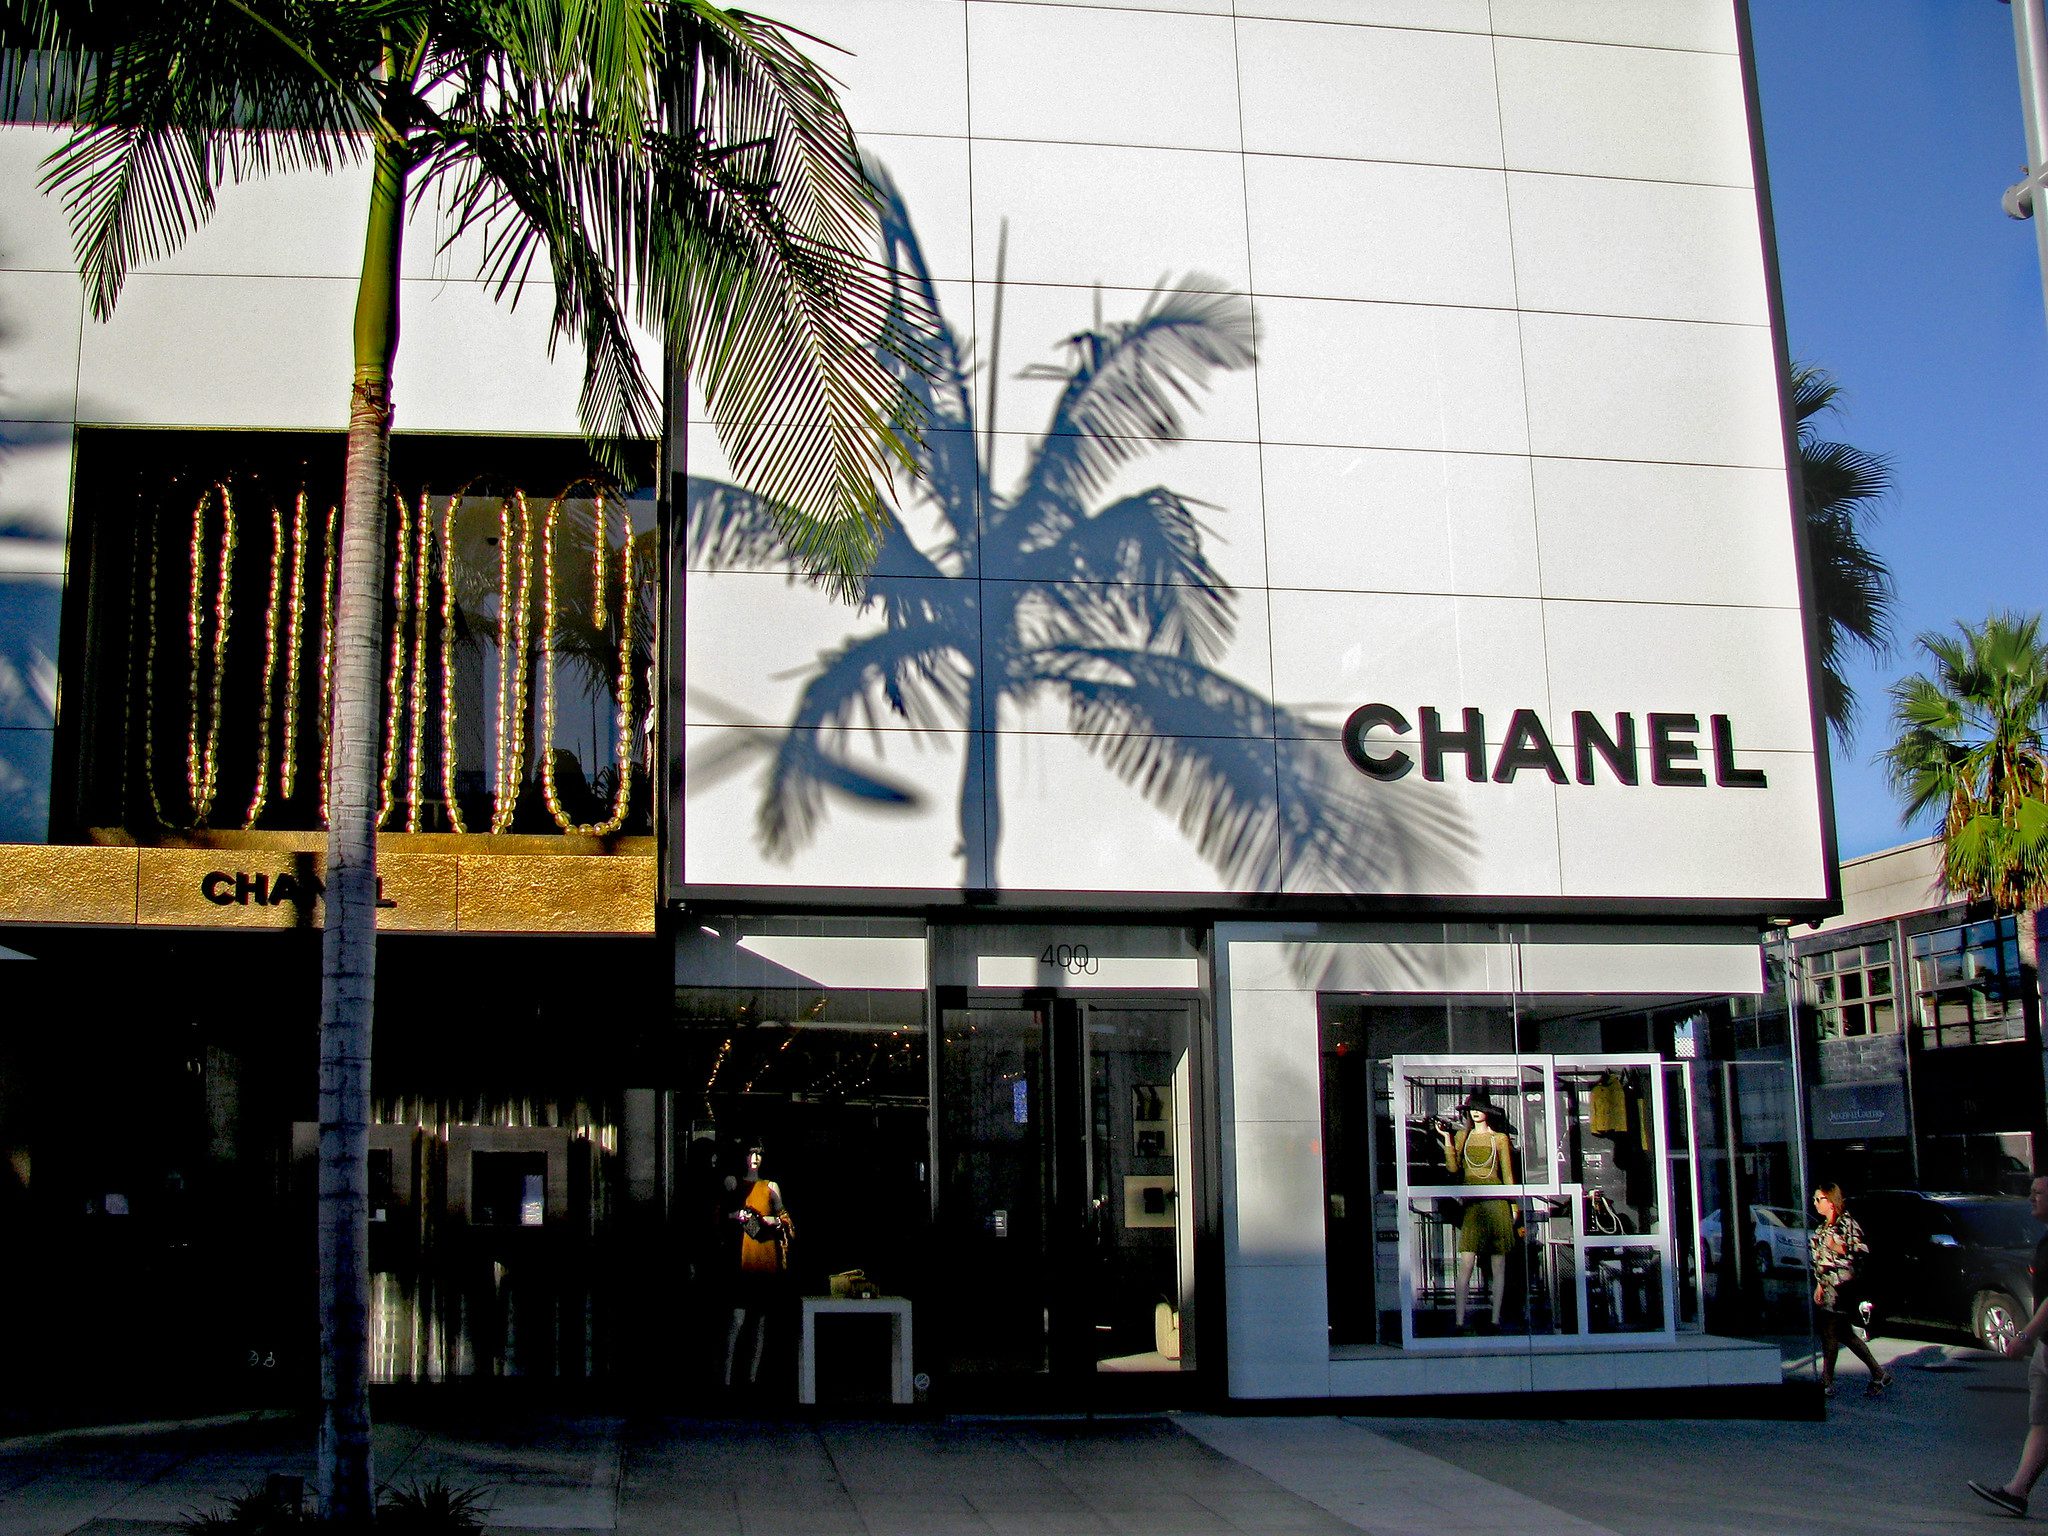 Van used to smash into Chanel store in Beverly Grove area of Los Angeles